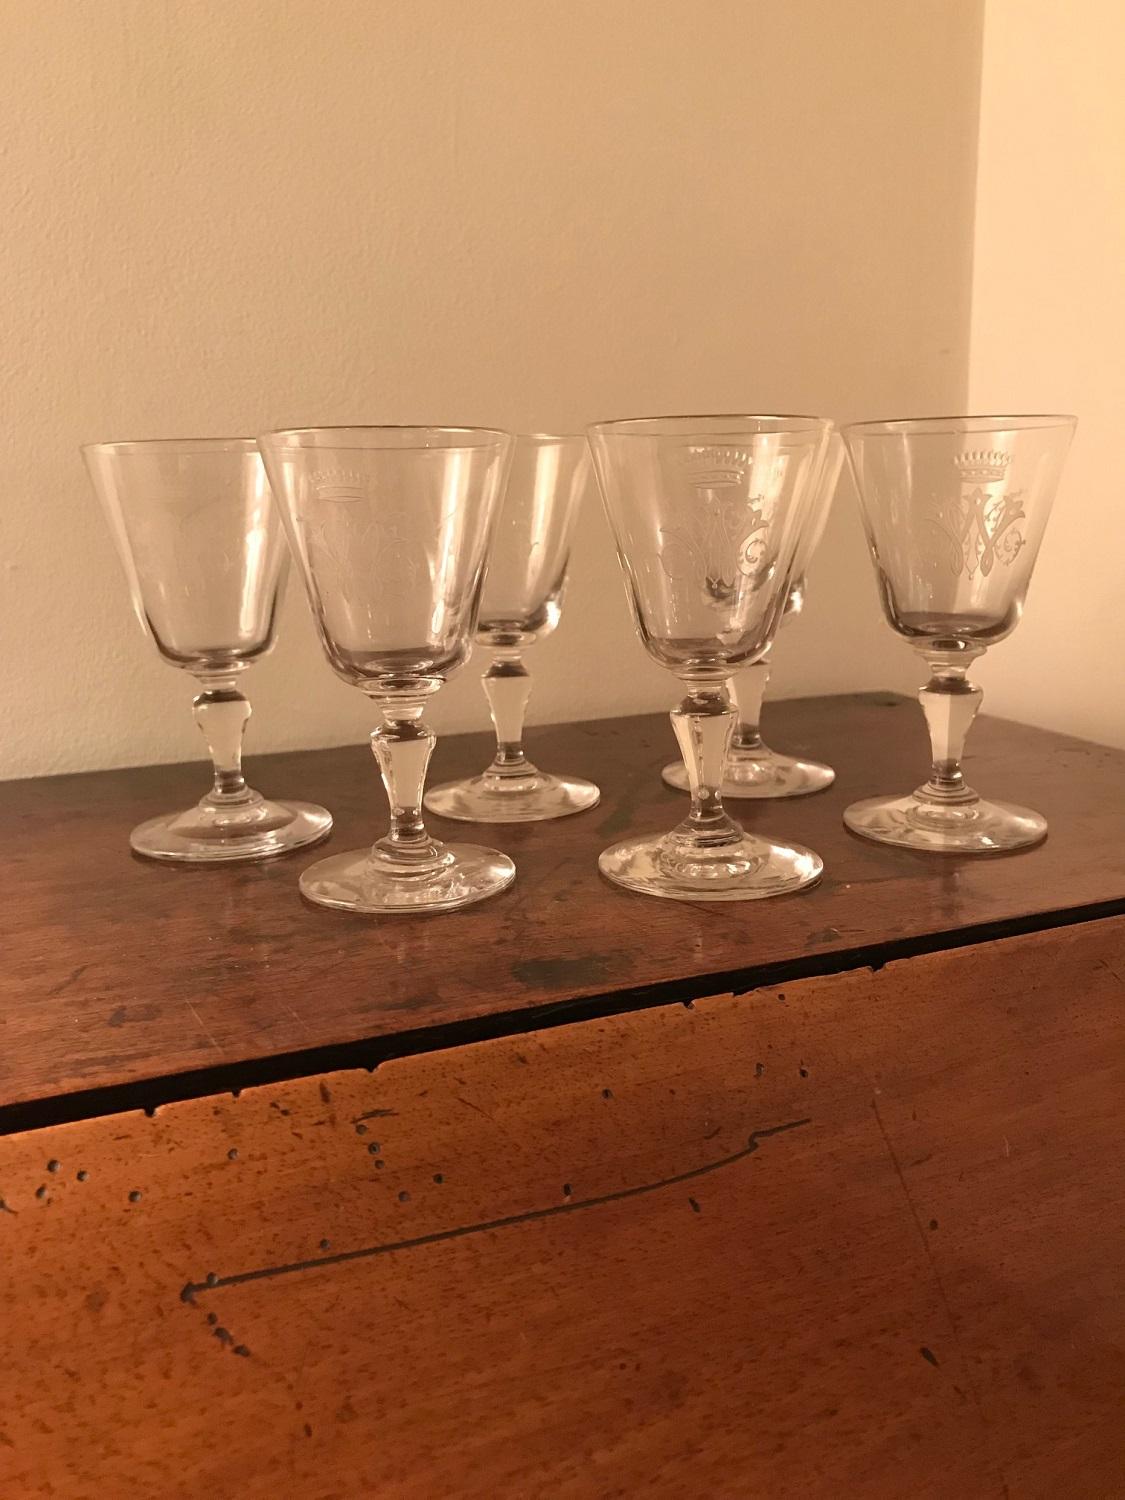 French 19th Century Crystal Liquor or Liqueur Glasses For Sale 4